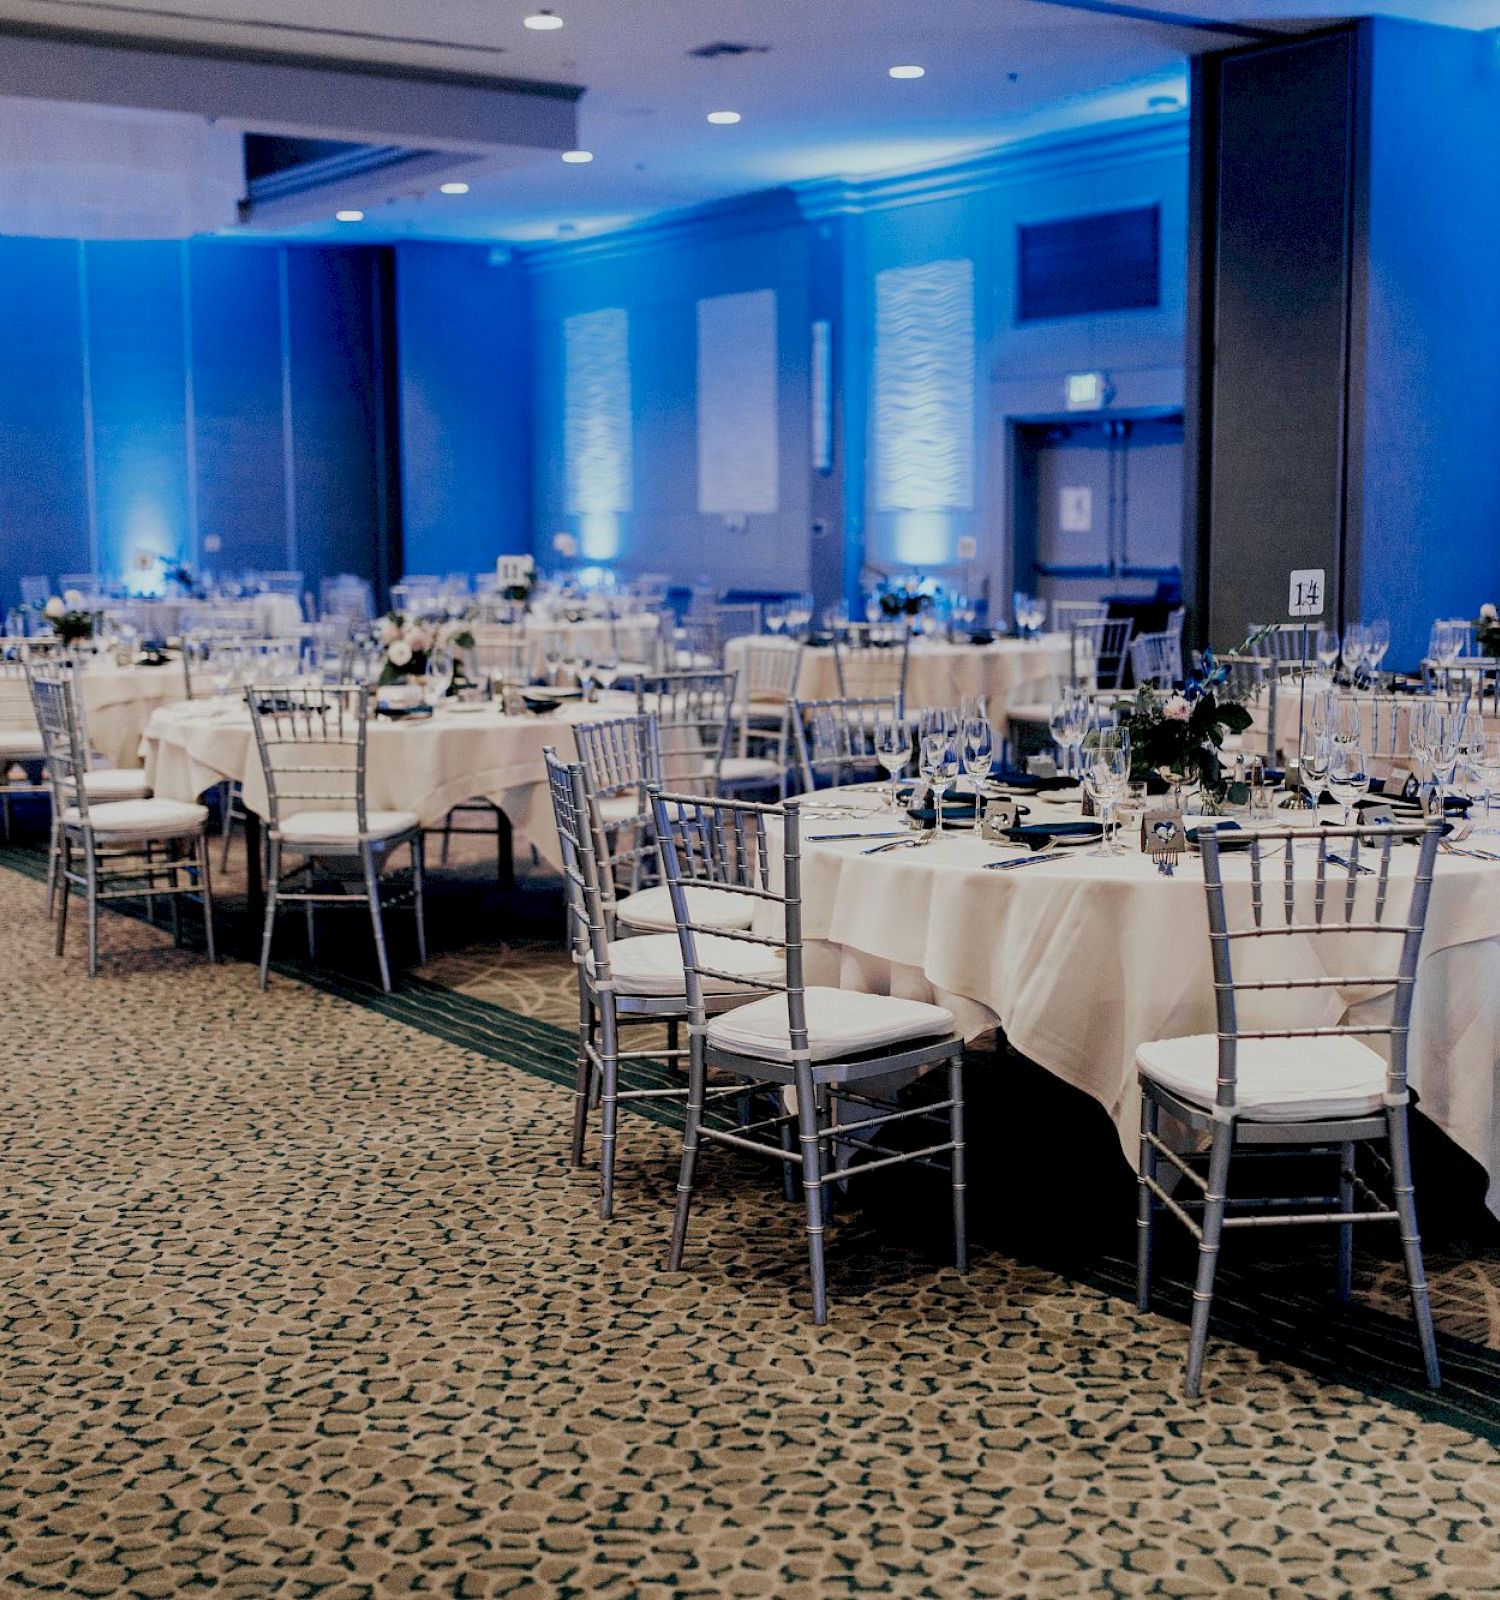 The image shows an elegantly decorated banquet hall with round tables, white tablecloths, and silver chairs.